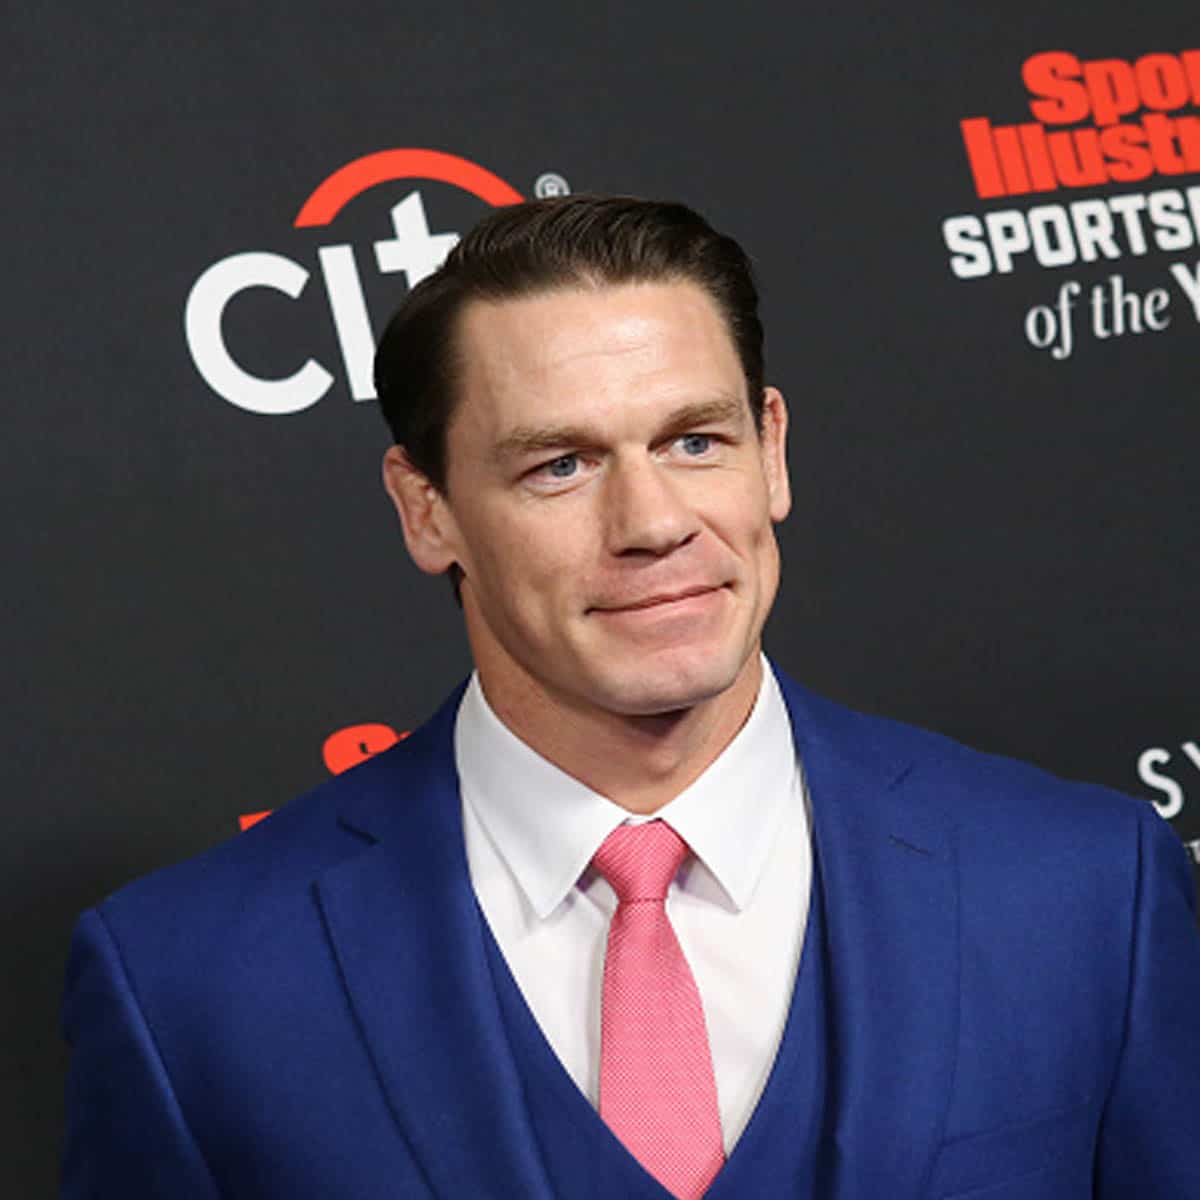 John Cena attends Sports Illustrated Sportsperson of The Year Awards